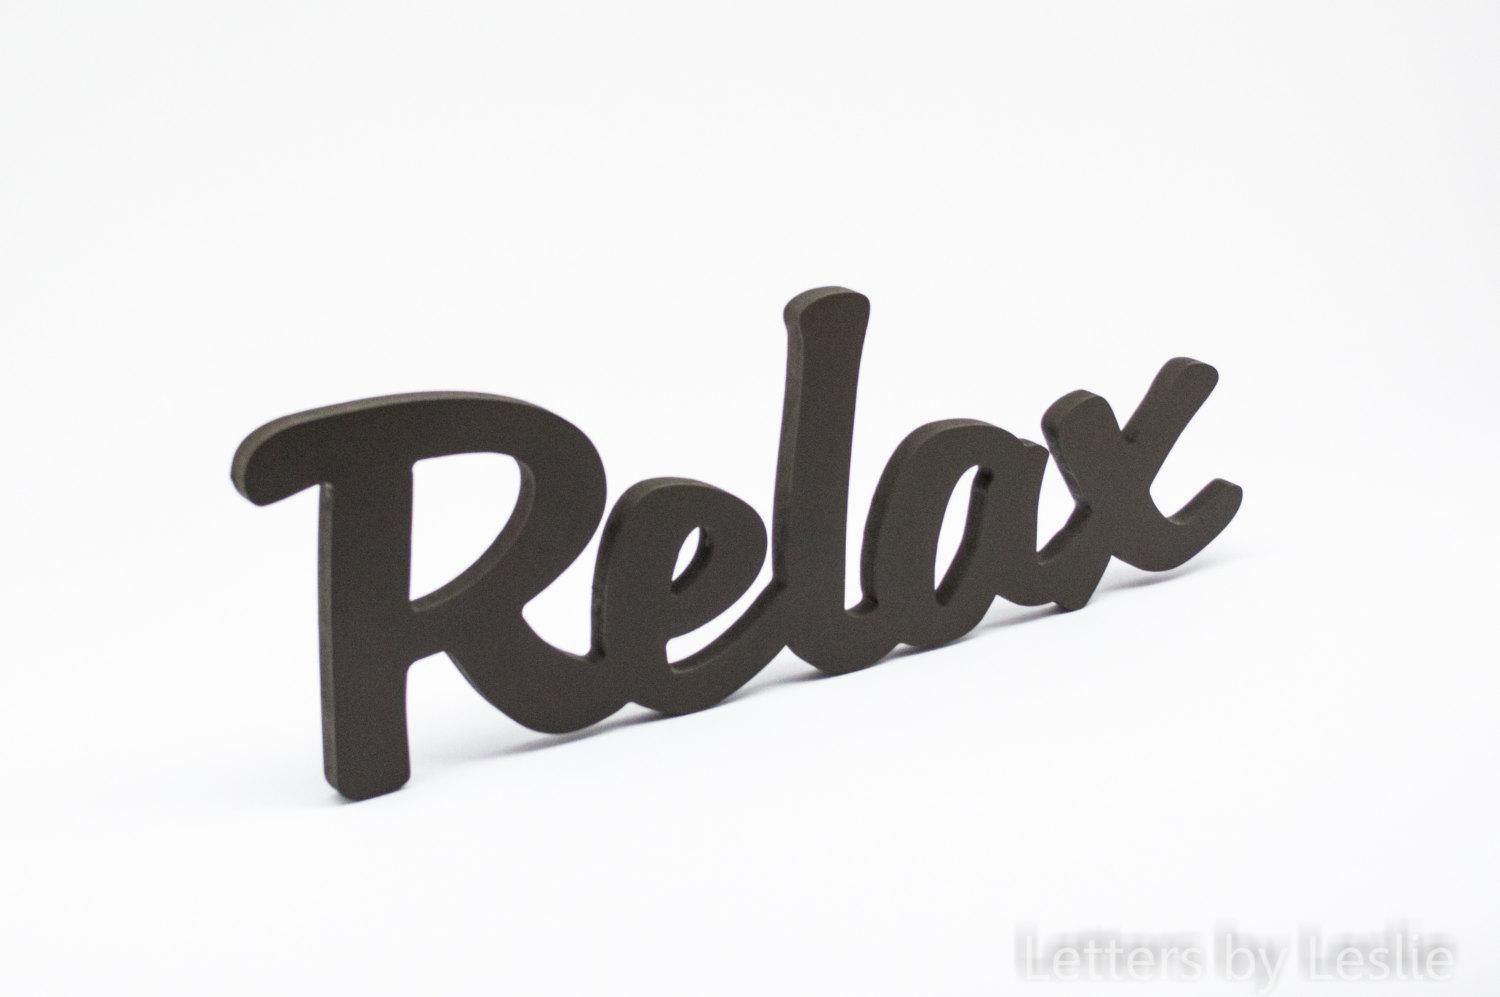 Wall Art Wooden Words | Wallartideas Within Wooden Words Wall Art (View 9 of 20)